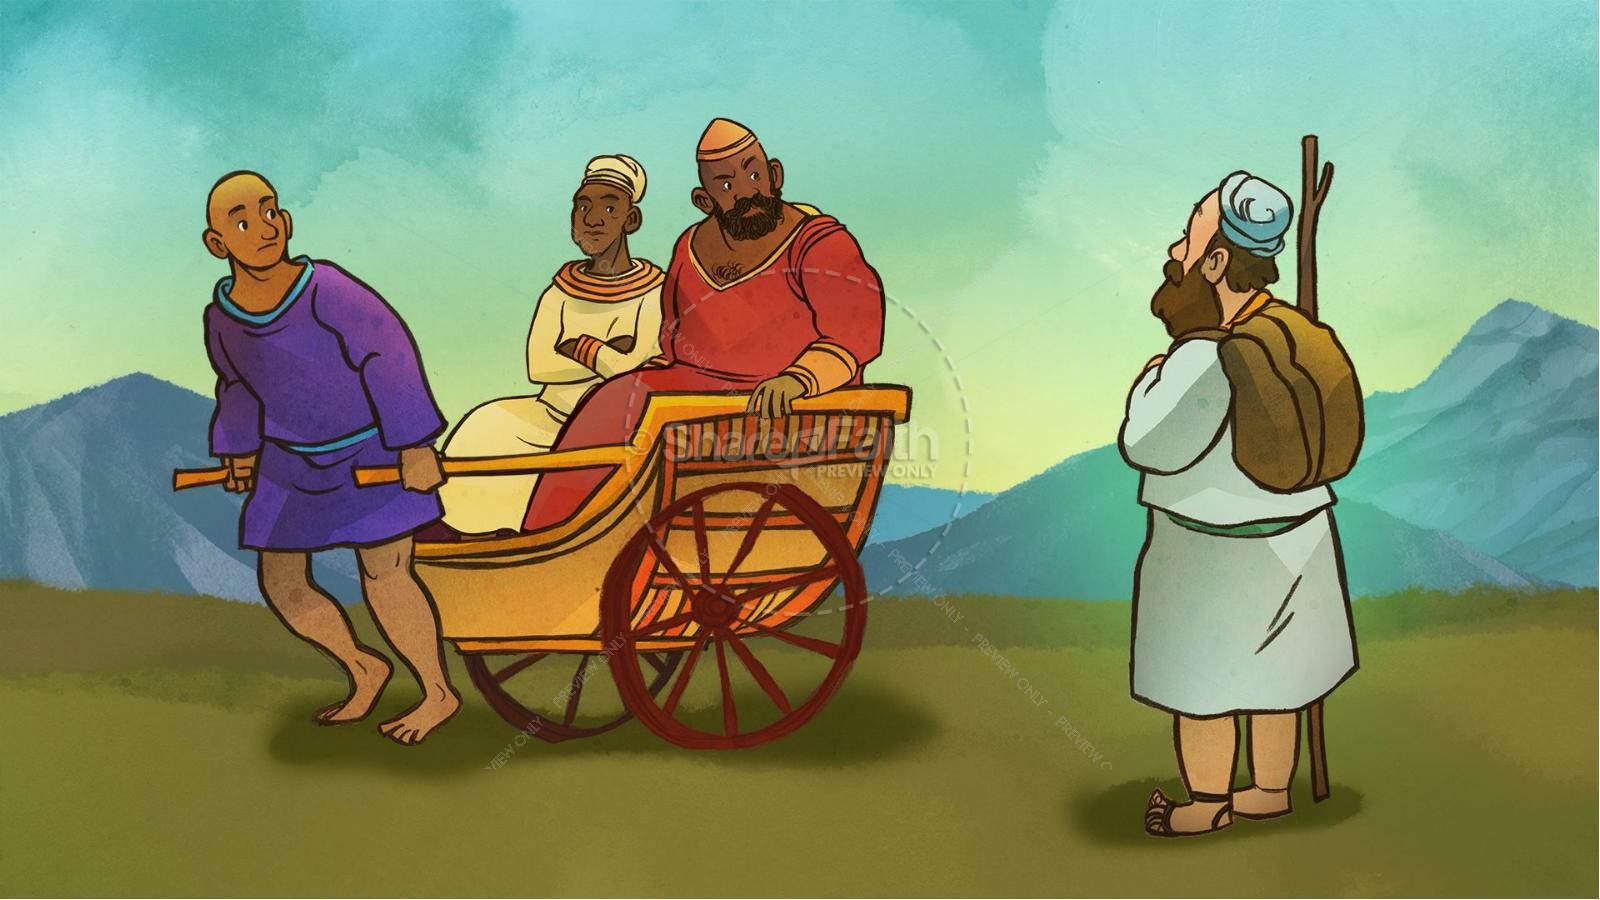 Acts 8 Philip and the Ethiopian Kids Bible Stories